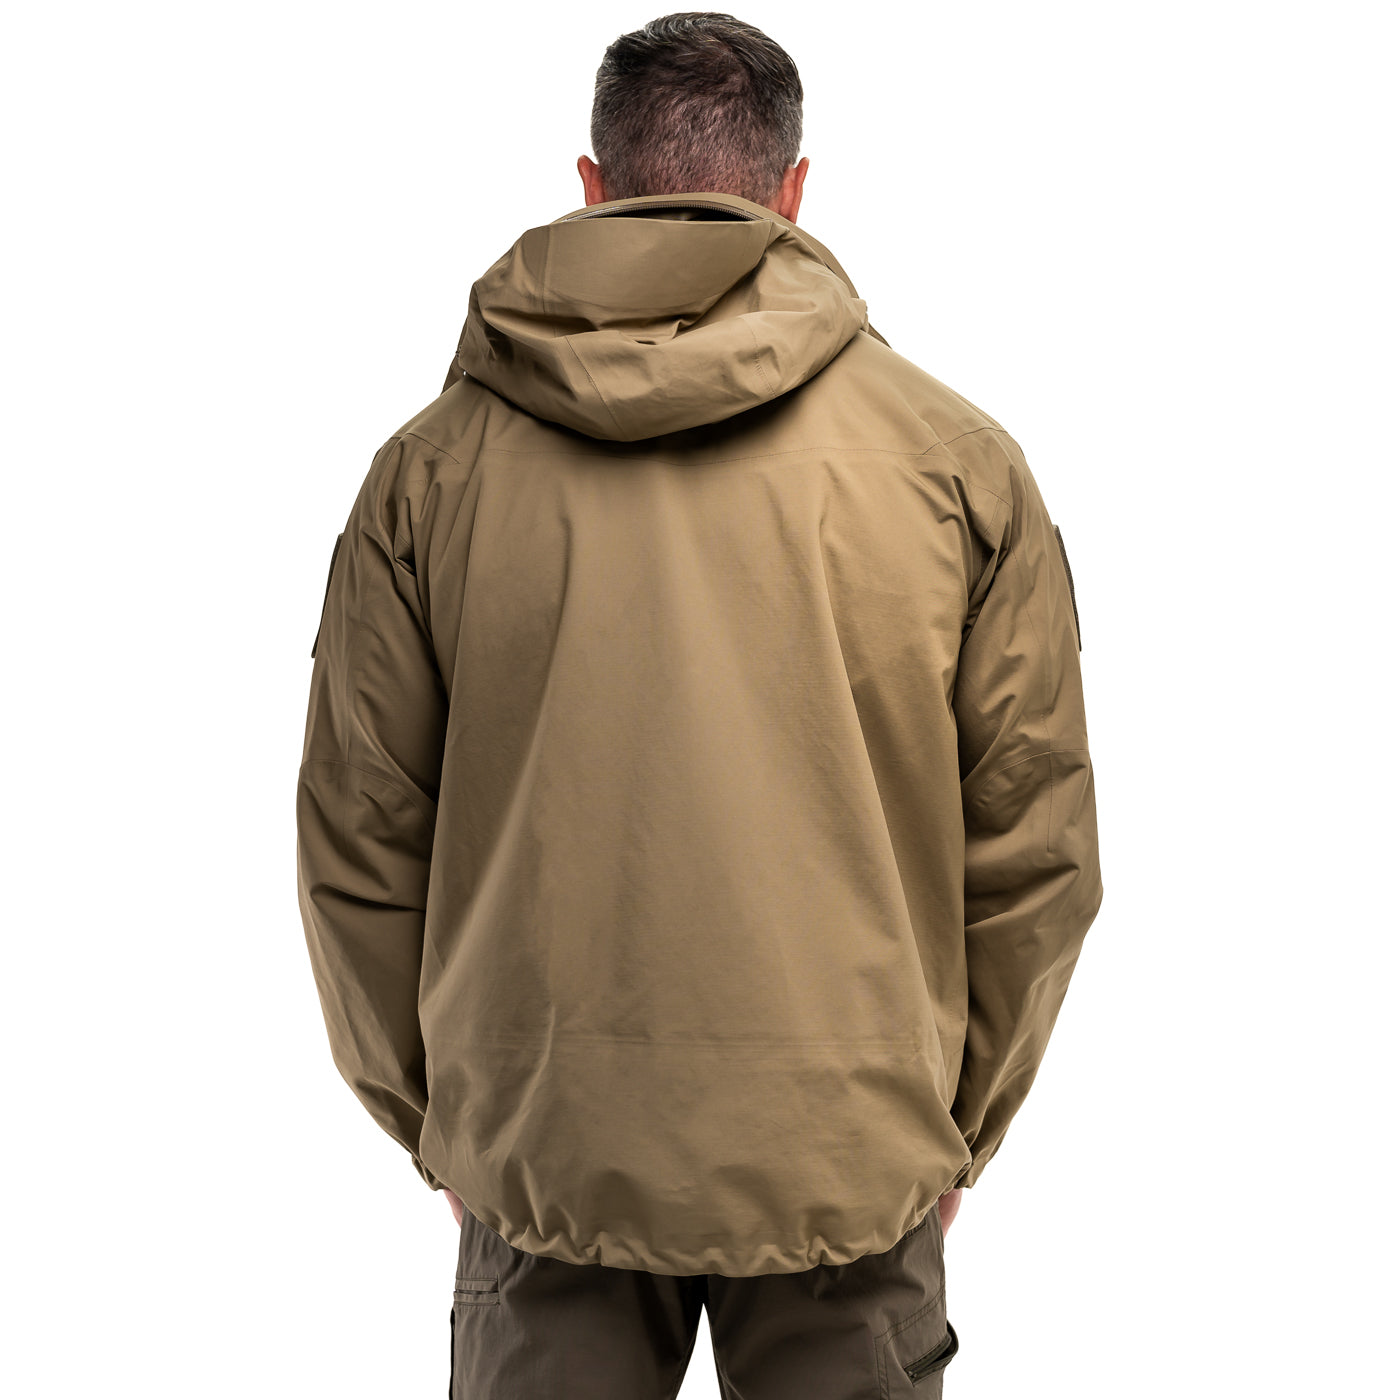 OTTE Gear LV Insulated Hooded Tactical Jacket, Weather-Resistant